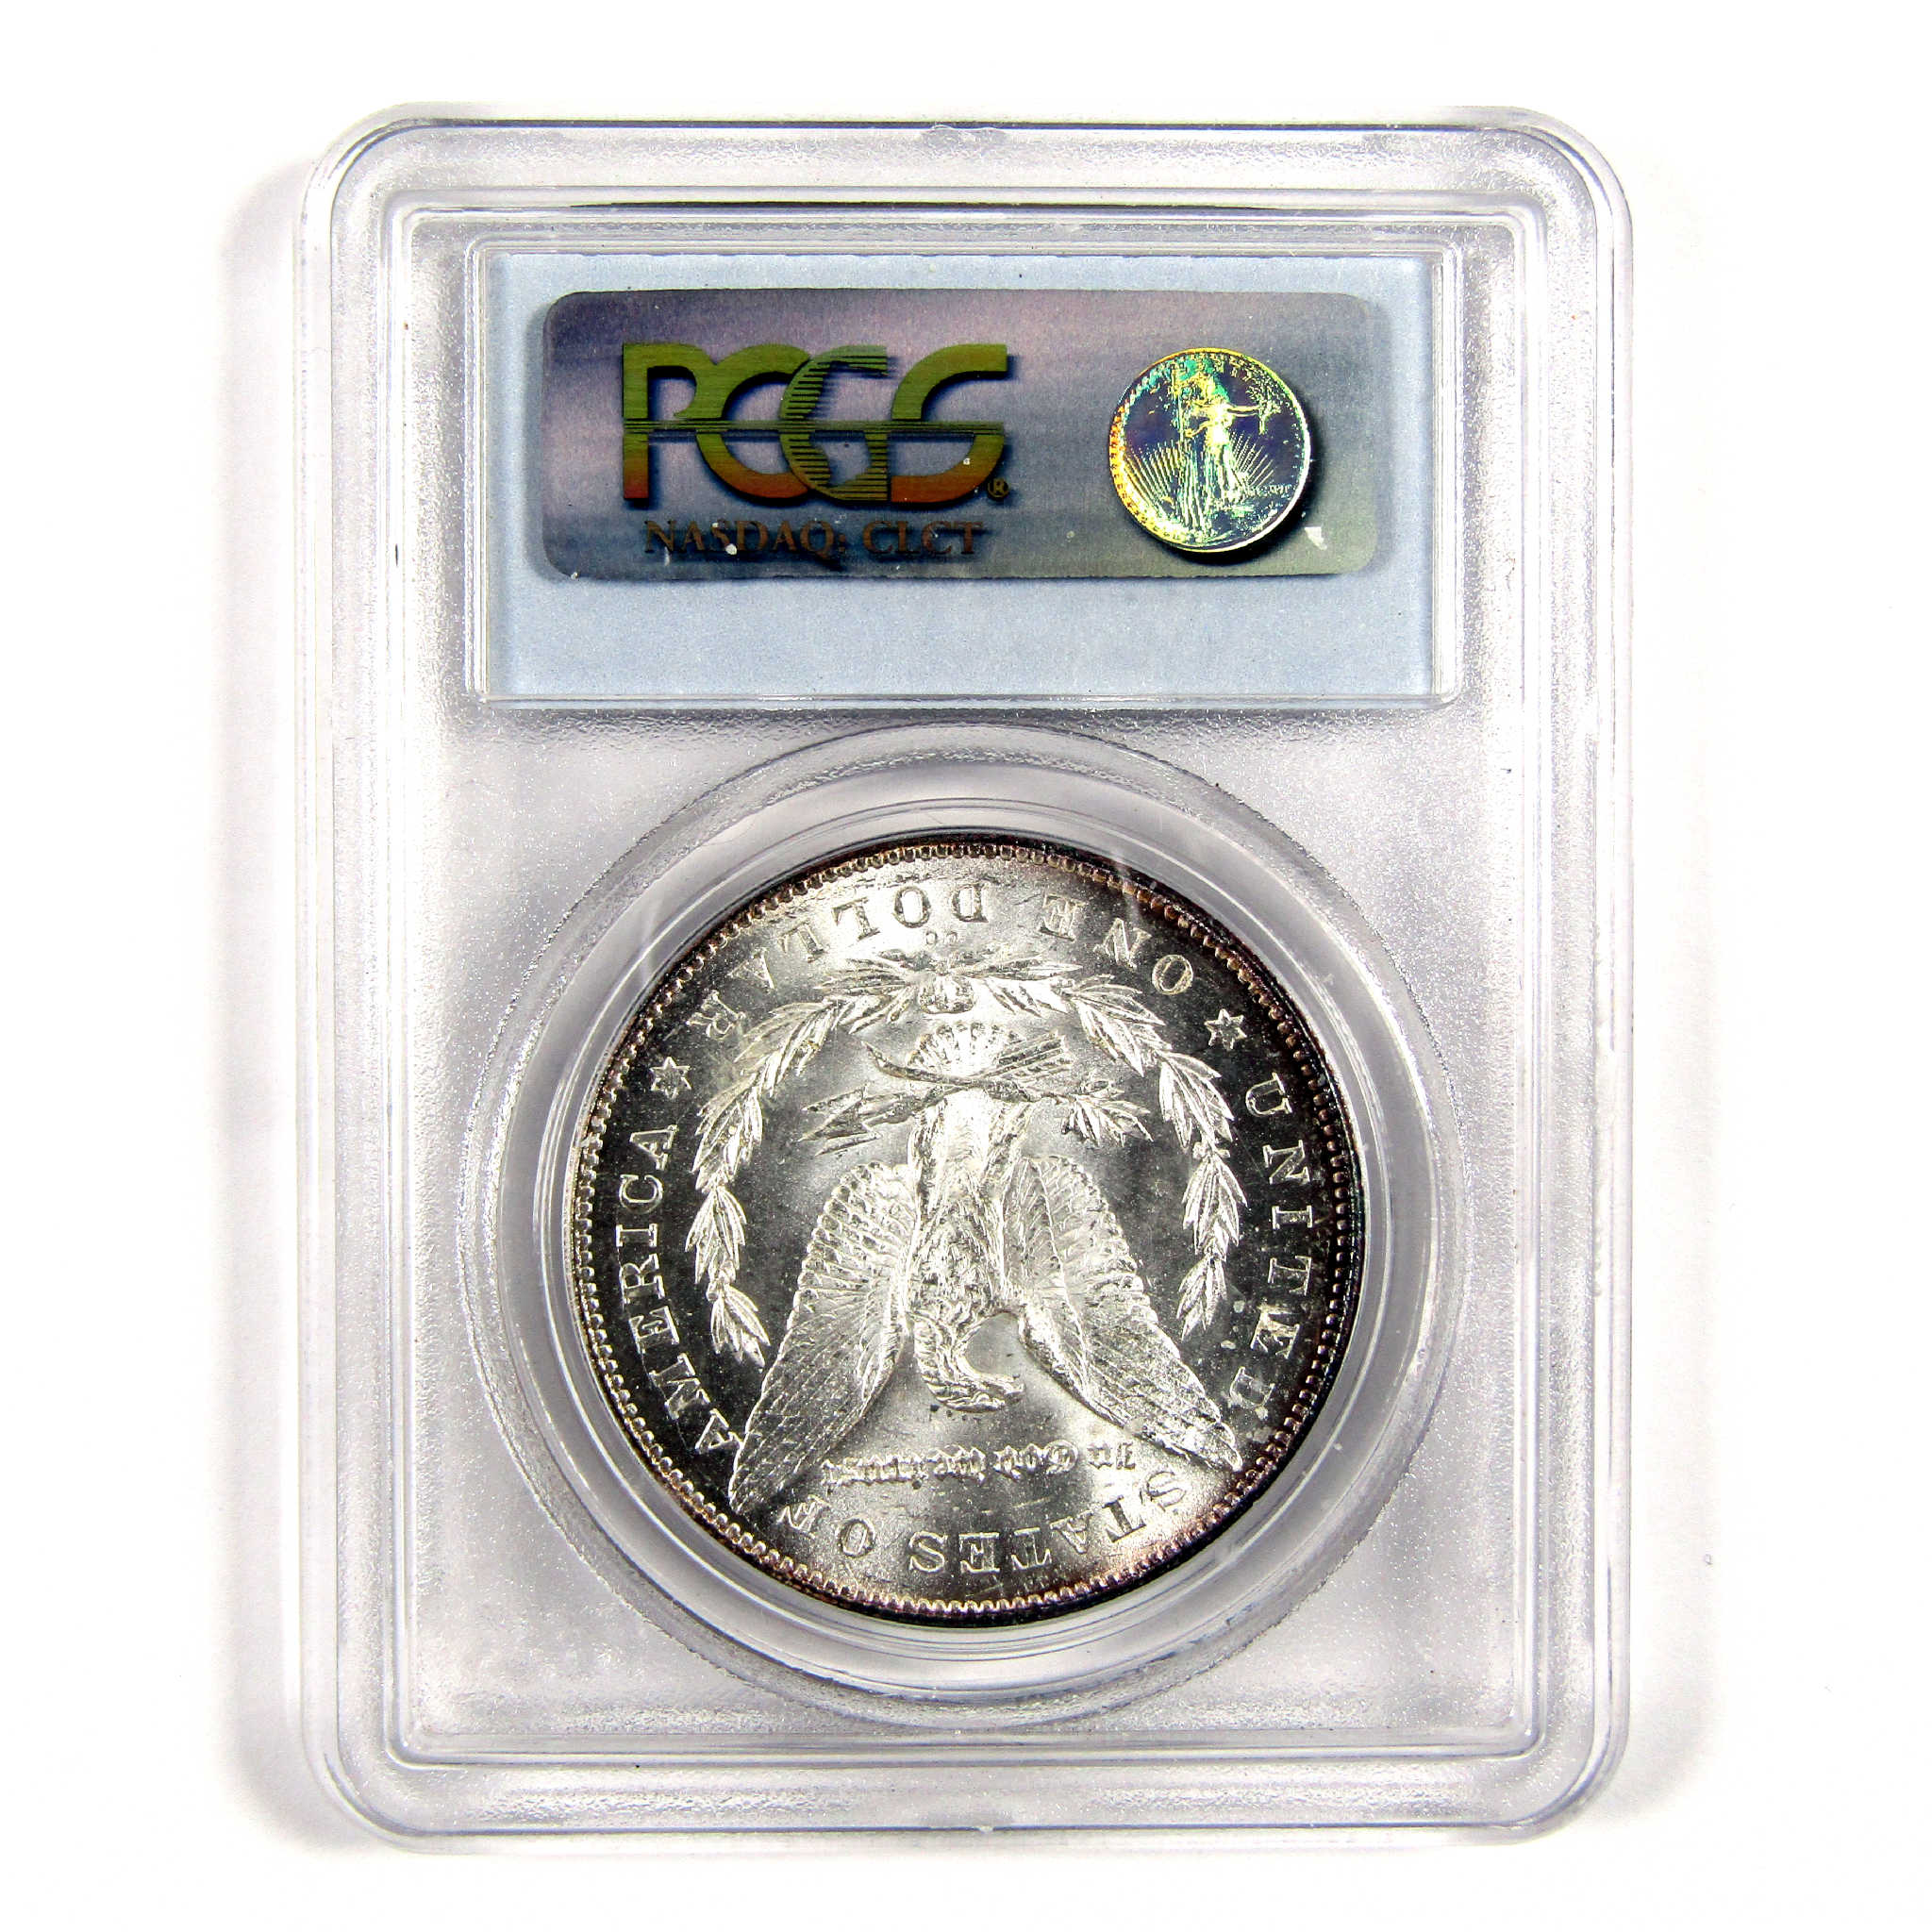 1878 CC Morgan Dollar MS 64 PCGS Silver $1 Uncirculated SKU:CPC6177 - Morgan coin - Morgan silver dollar - Morgan silver dollar for sale - Profile Coins &amp; Collectibles